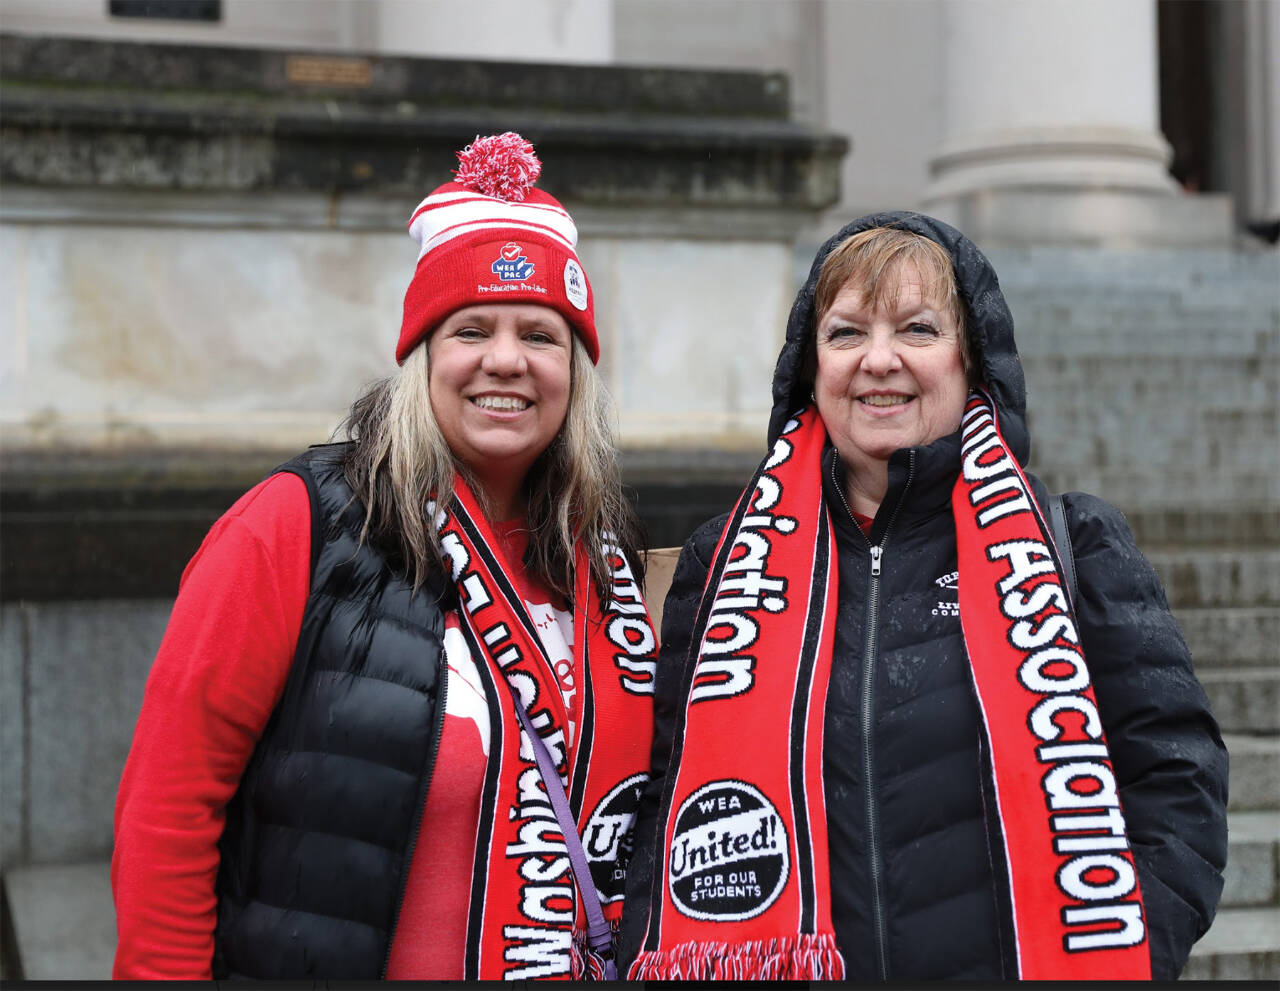 Photo by Mary Murphy/Washington State Journal / Melissa Walker, paraeducator, left, and Terry Winkler, a fifth-grade teacher, sport Washington Education Association gear as they rally in the rain for fair wages on Feb. 19.